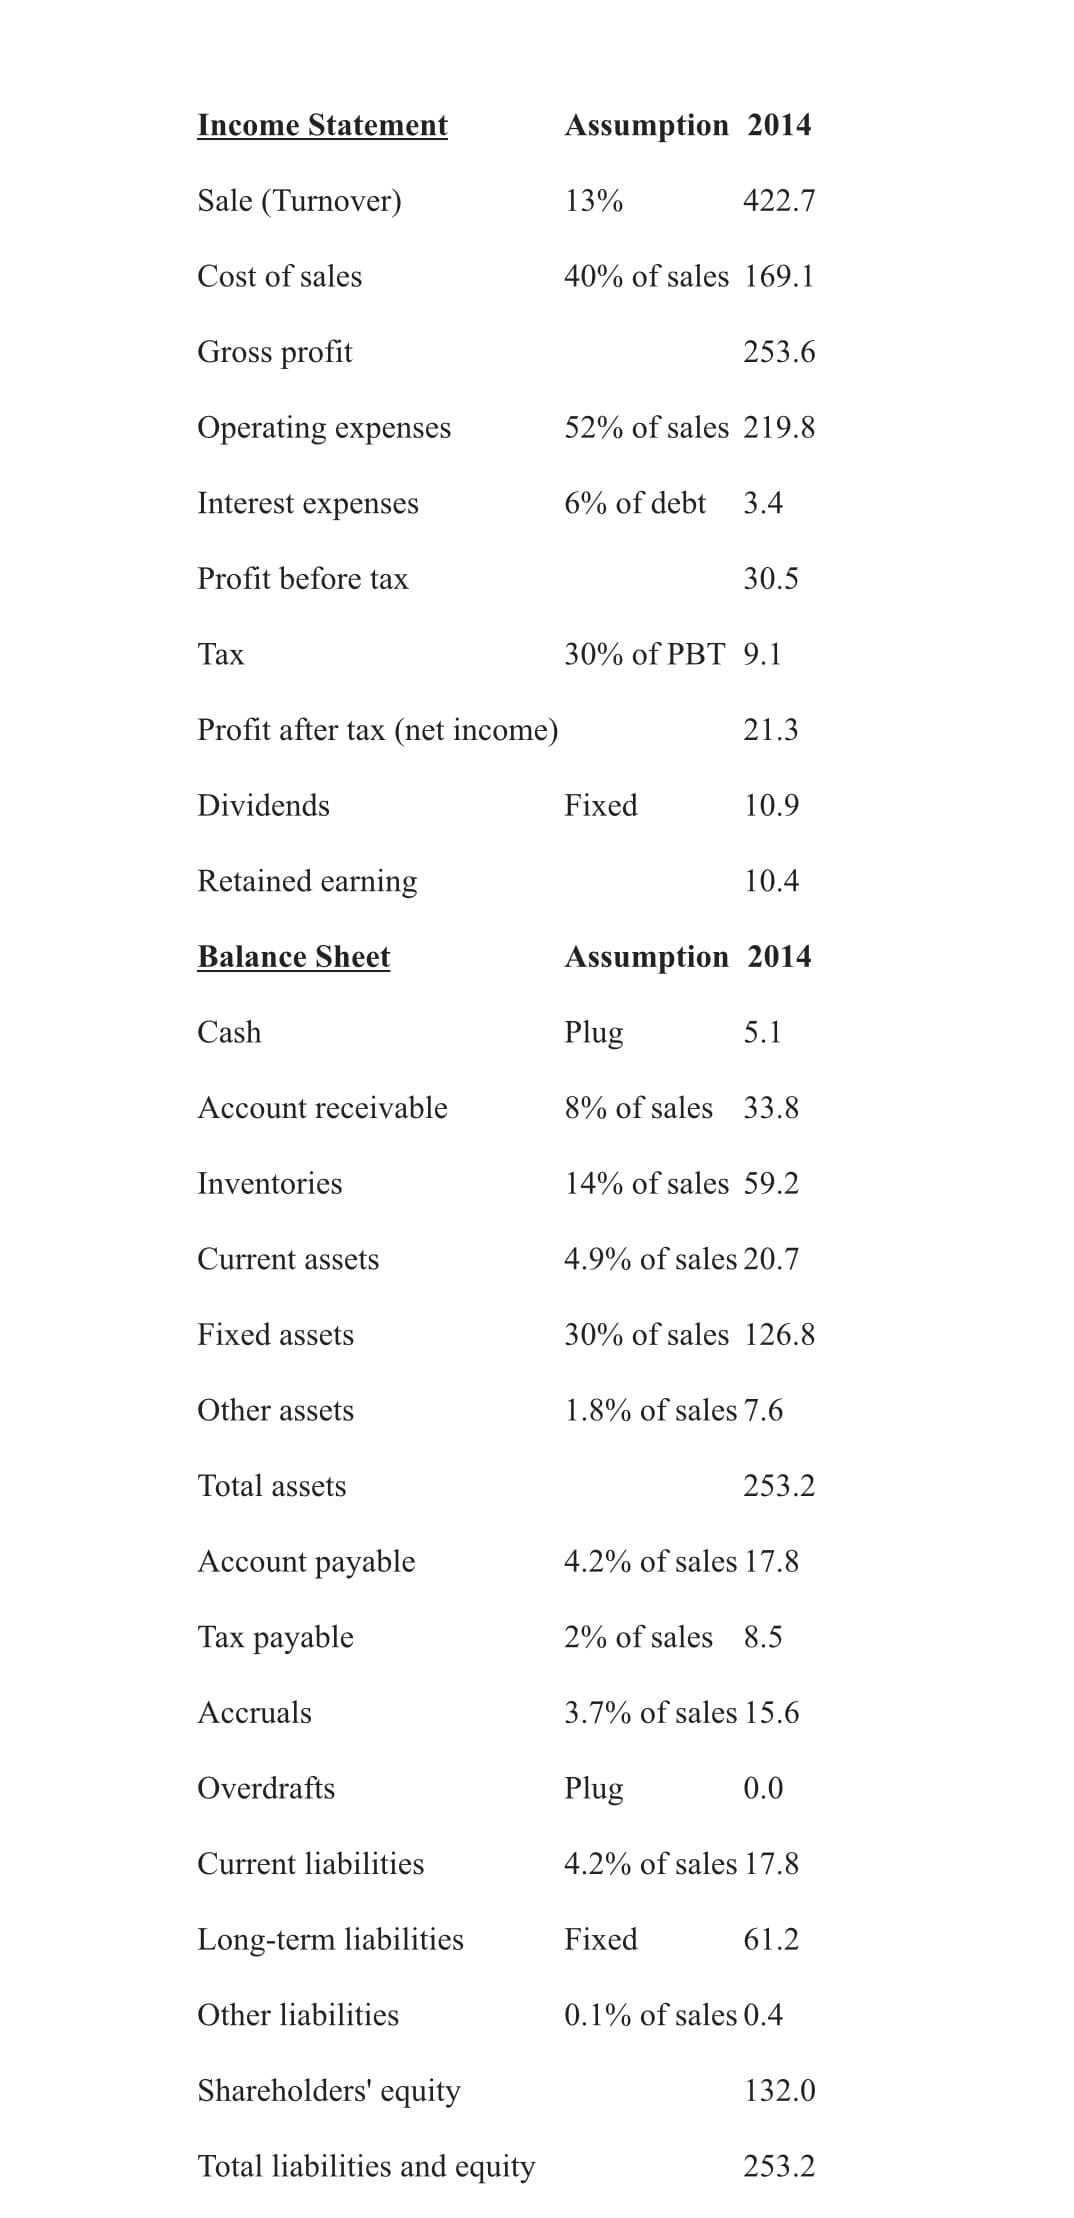 Income Statement
Assumption 2014
Sale (Turnover)
13%
422.7
Cost of sales
40% of sales 169.1
Gross profit
253.6
Operating expenses
52% of sales 219.8
Interest expenses
6% of debt
3.4
Profit before tax
30.5
Тах
30% of PBT 9.1
Profit after tax (net income)
21.3
Dividends
Fixed
10.9
Retained earning
10.4
Balance Sheet
Assumption 2014
Cash
Plug
5.1
Account receivable
8% of sales 33.8
Inventories
14% of sales 59.2
Current assets
4.9% of sales 20.7
Fixed assets
30% of sales 126.8
Other assets
1.8% of sales 7.6
Total assets
253.2
Account payable
4.2% of sales 17.8
Таx рayable
2% of sales 8.5
Аccruals
3.7% of sales 15.6
Overdrafts
Plug
0.0
Current liabilities
4.2% of sales 17.8
Long-term liabilities
Fixed
61.2
Other liabilities
0.1% of sales 0.4
Shareholders' equity
132.0
Total liabilities and equity
253.2
